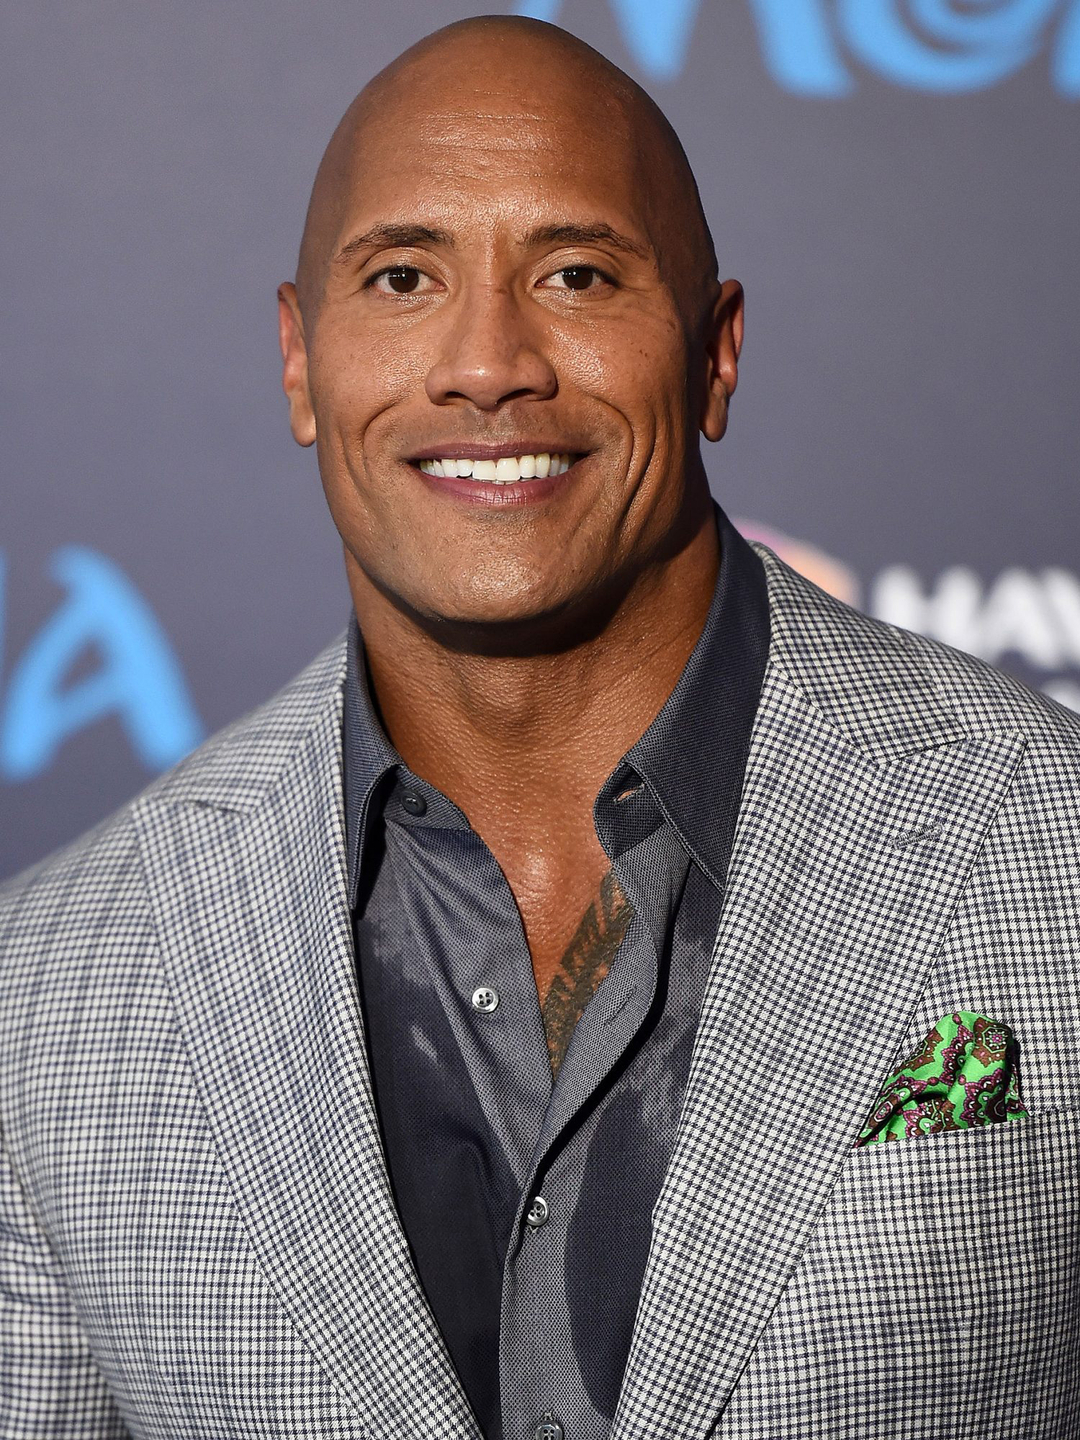 Dwayne Johnson where is he now